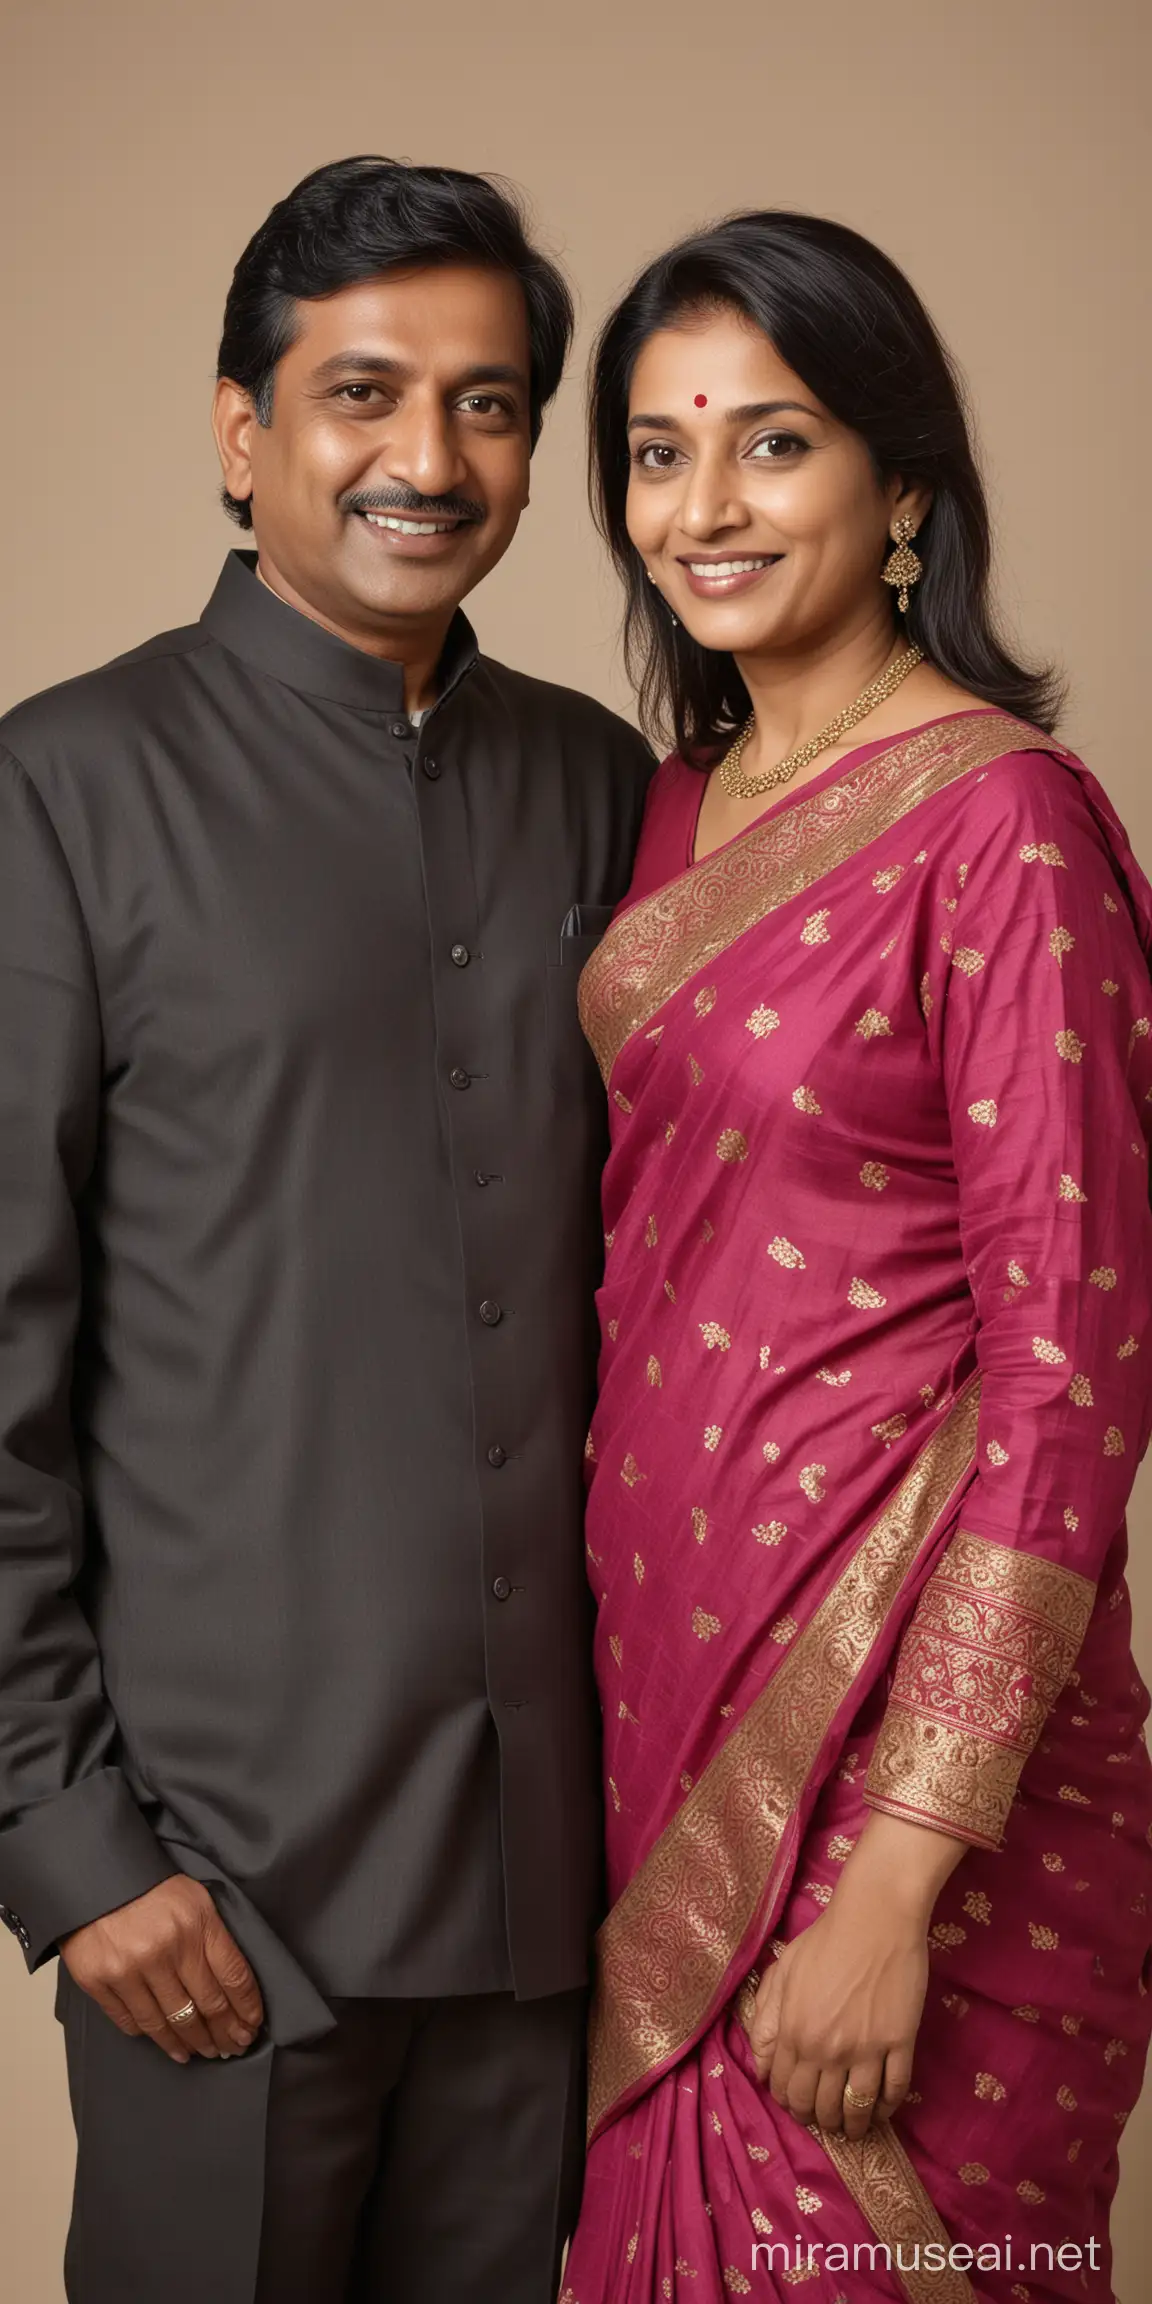 Middle aged Indian couple 